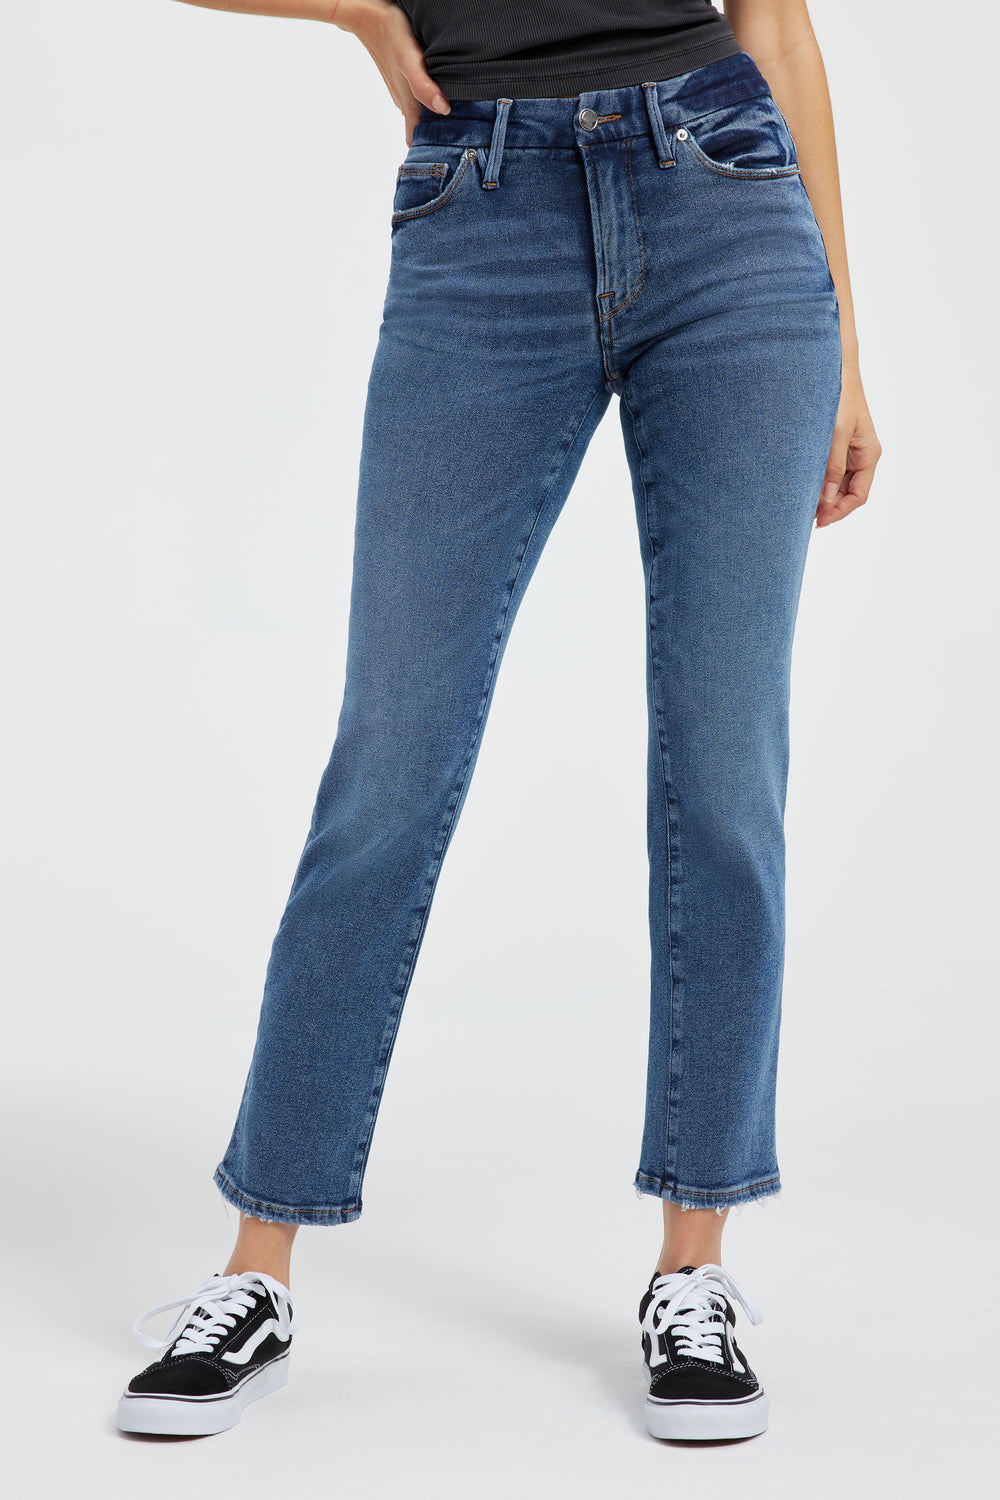 20 Jeans for Thick Thighs That Won't Gap at the Waist 2022: Everlane,  Levi's, Madewell, Good American